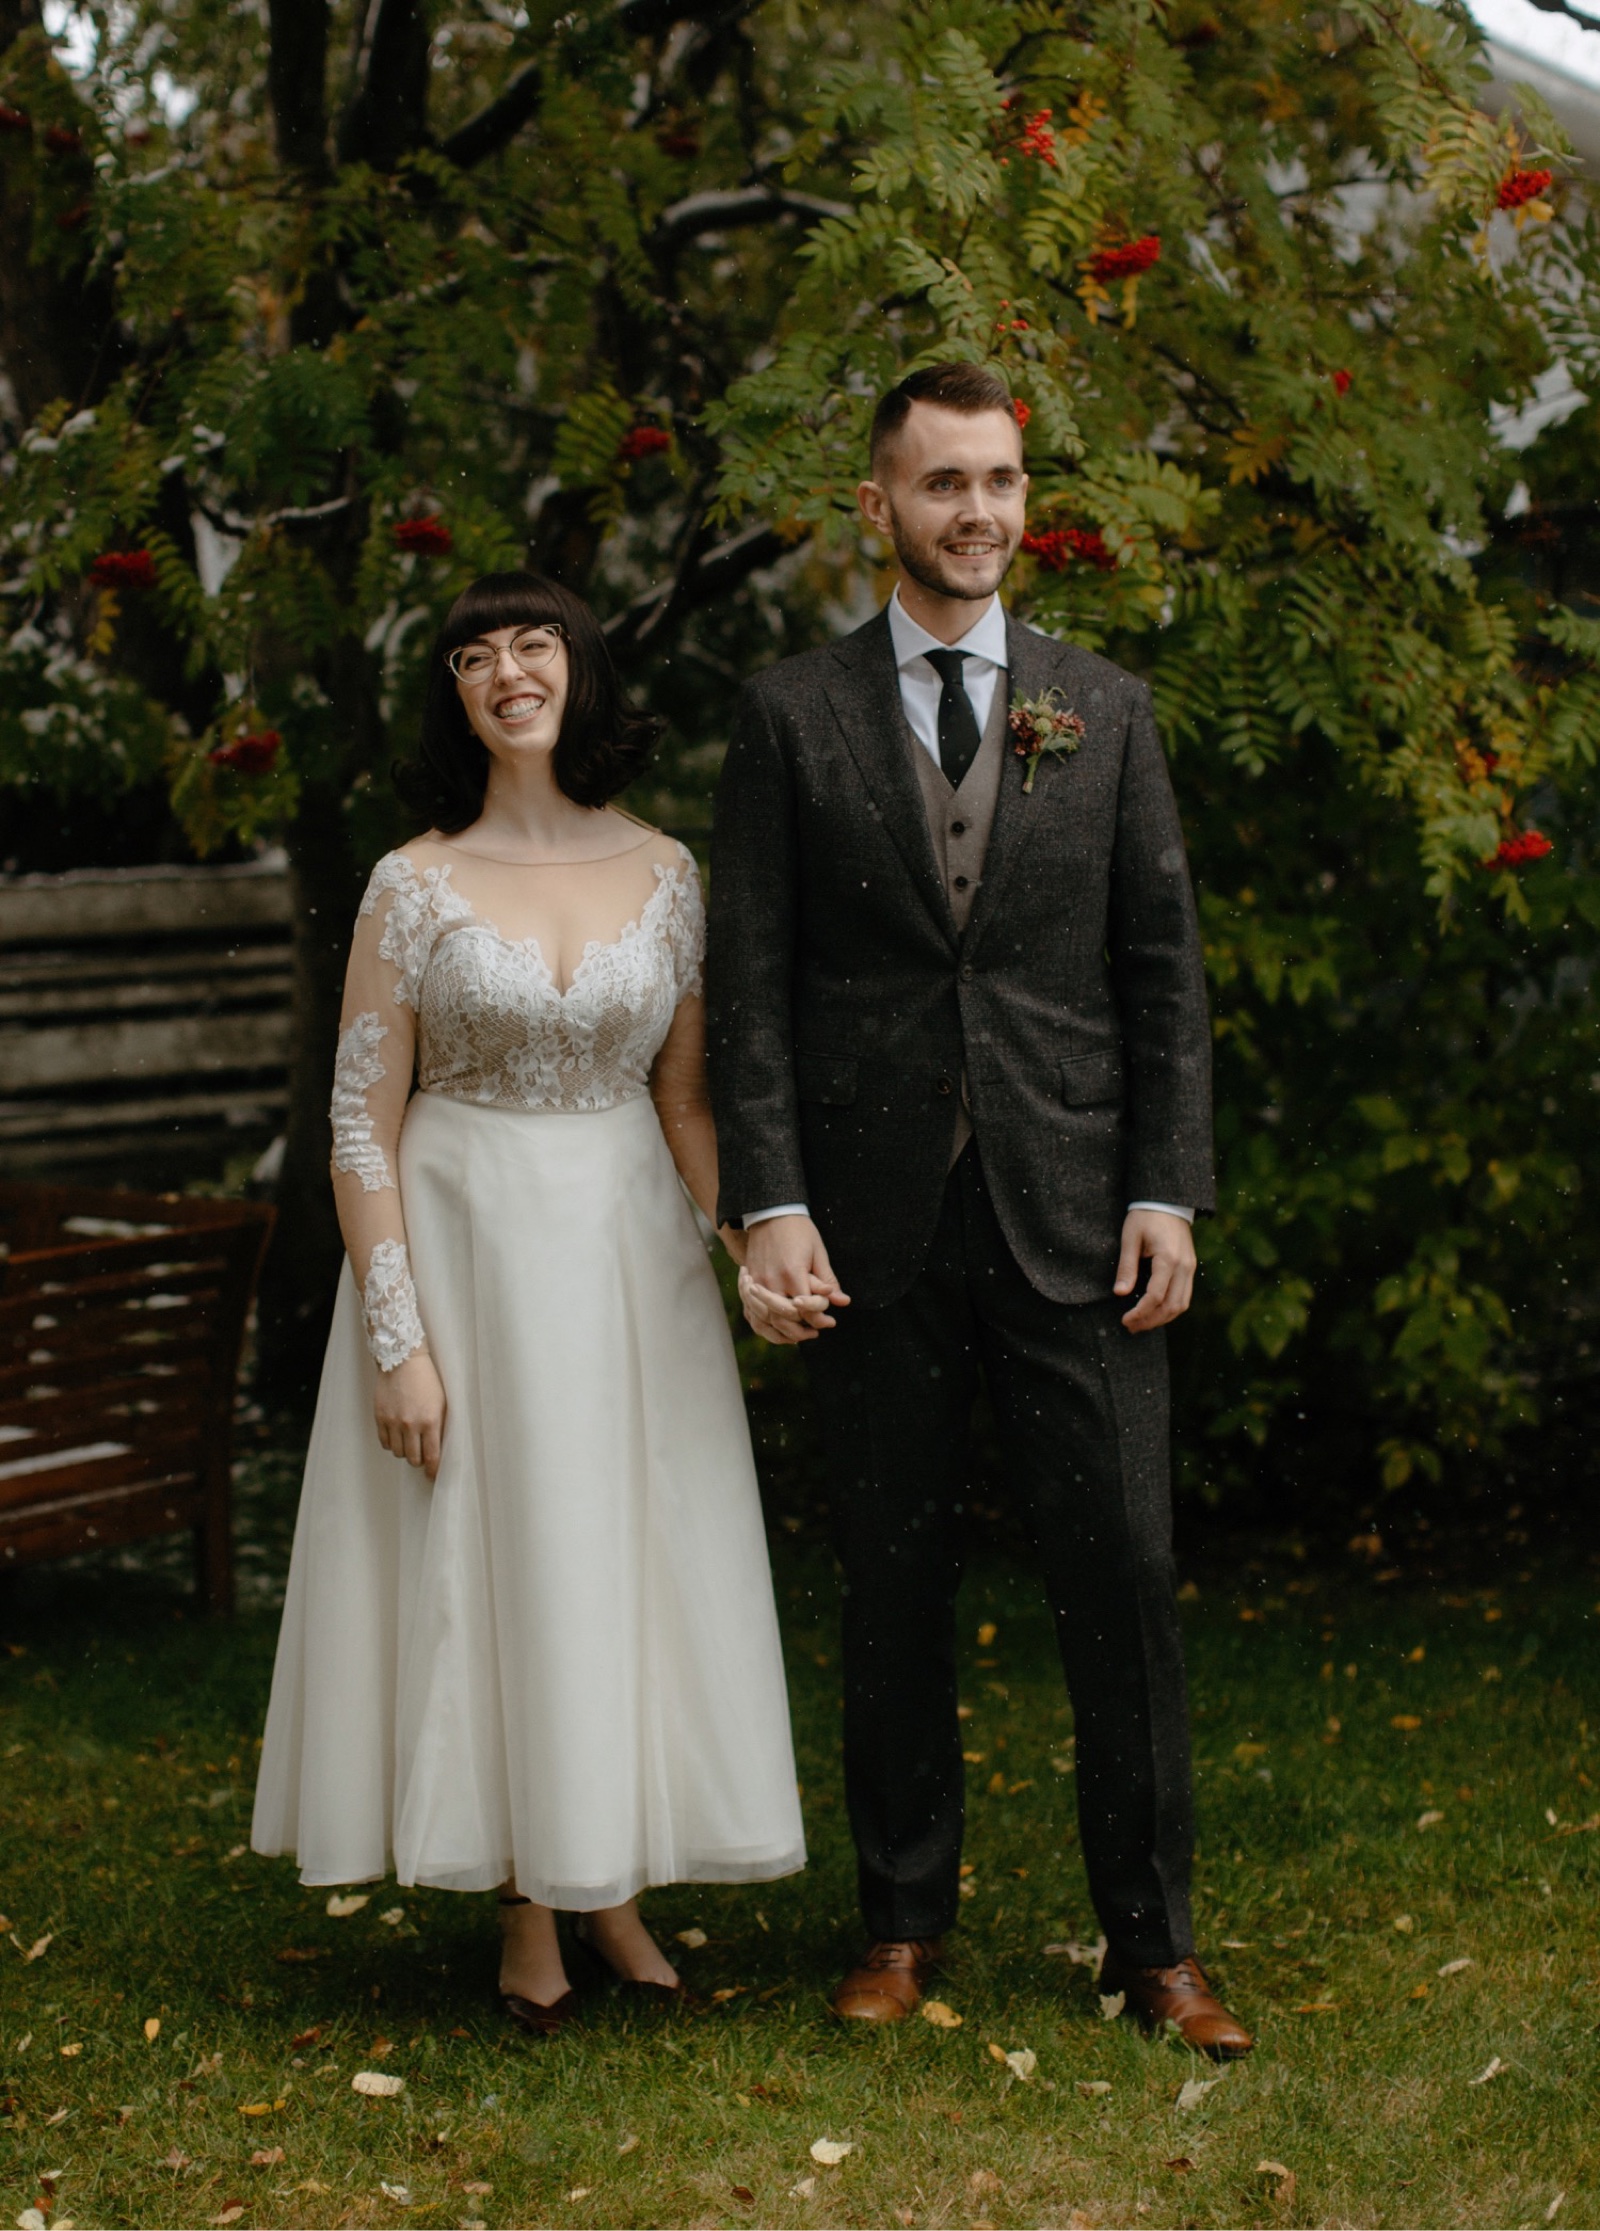 Retro 1950s bridal fashion with a custom skirt and patterned suit for a snowy Edmonton wedding